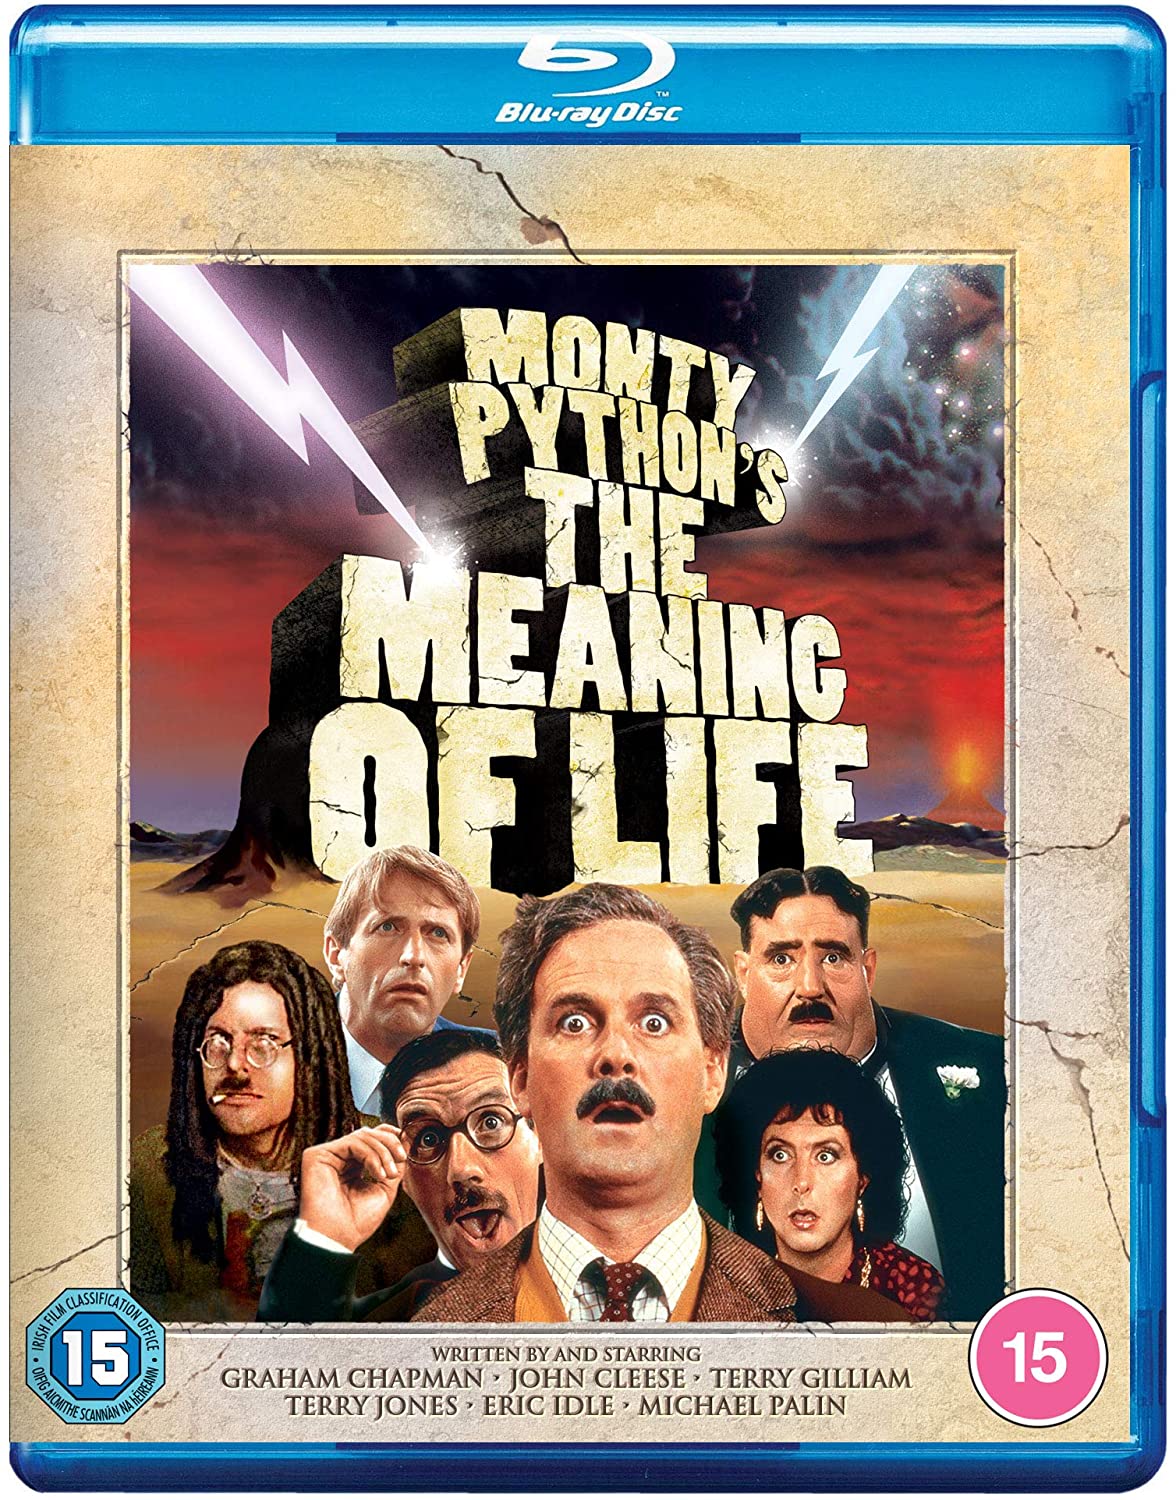 boom competitions - win Monty Python's The Meaning of Life on Blu-ray